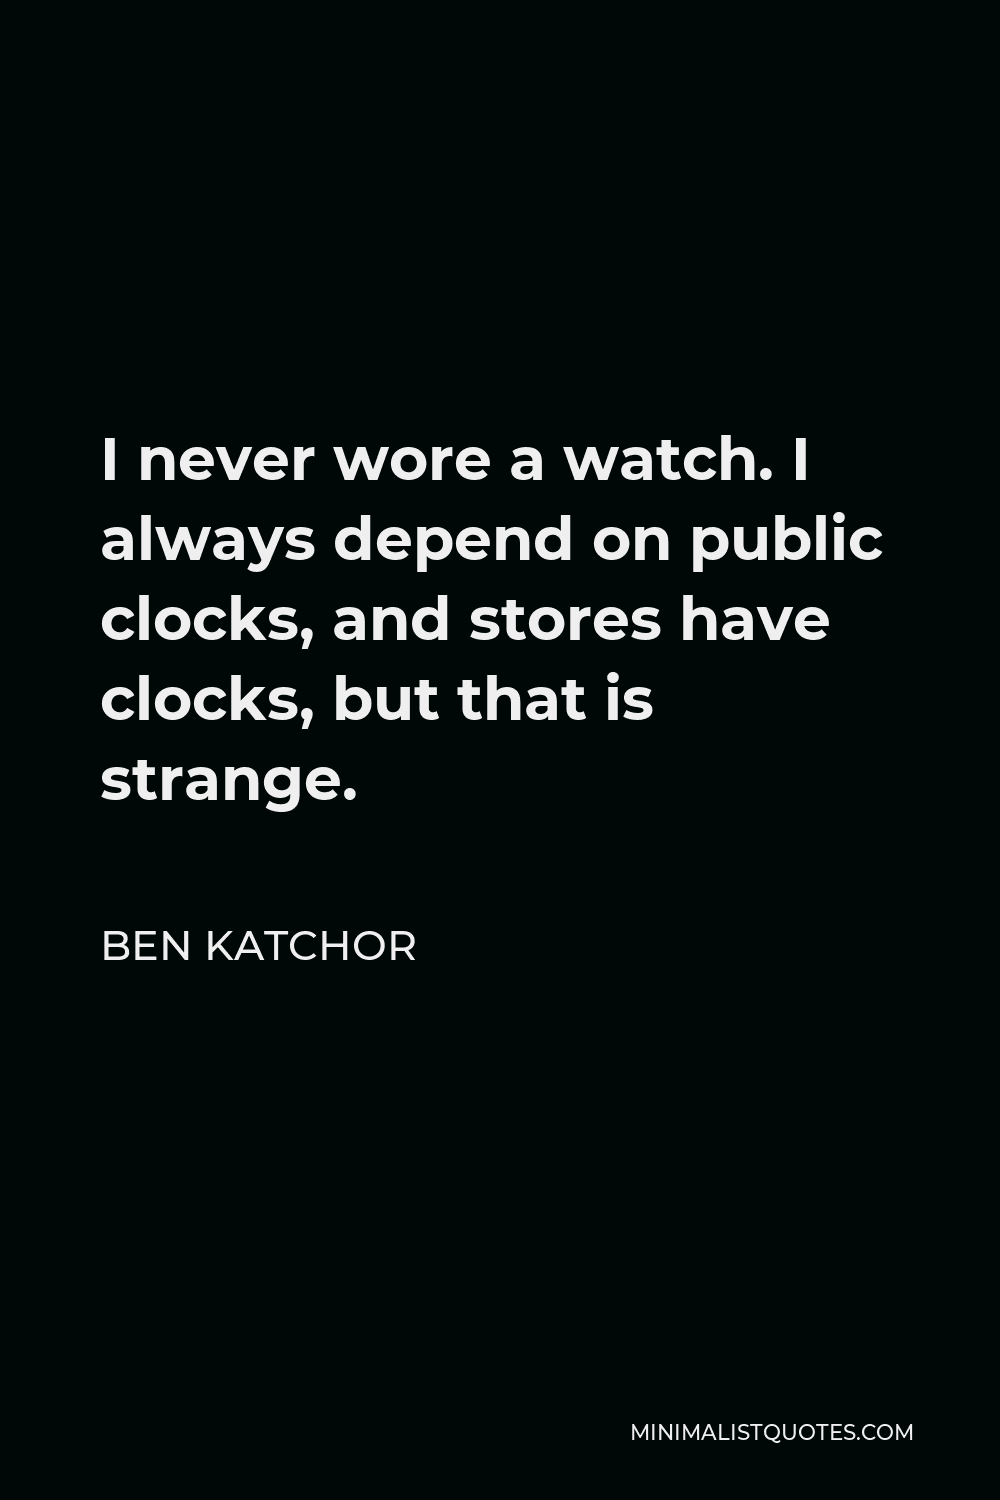 Ben Katchor Quote - I never wore a watch. I always depend on public clocks, and stores have clocks, but that is strange.